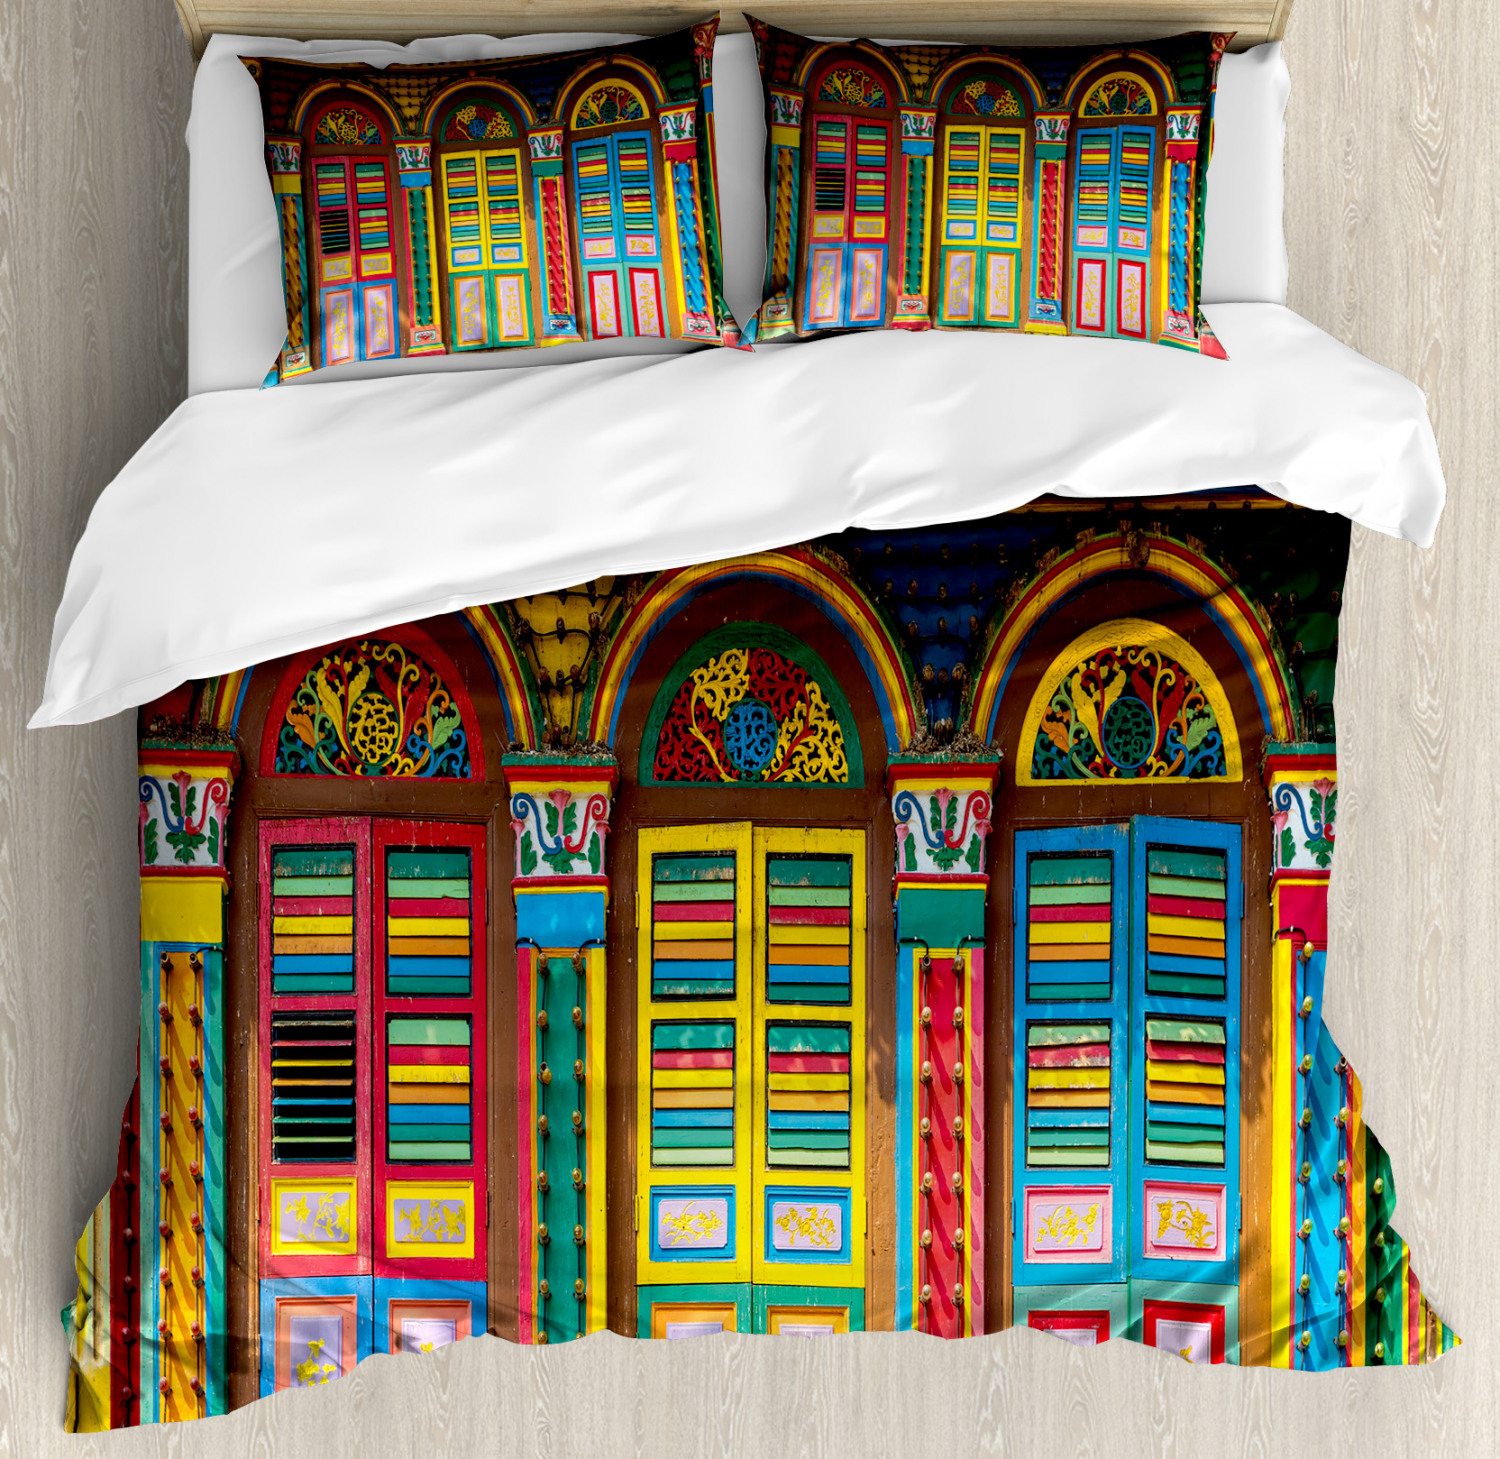 Colorful Duvet Cover Set With Pillow Shams Scenes From Singapore